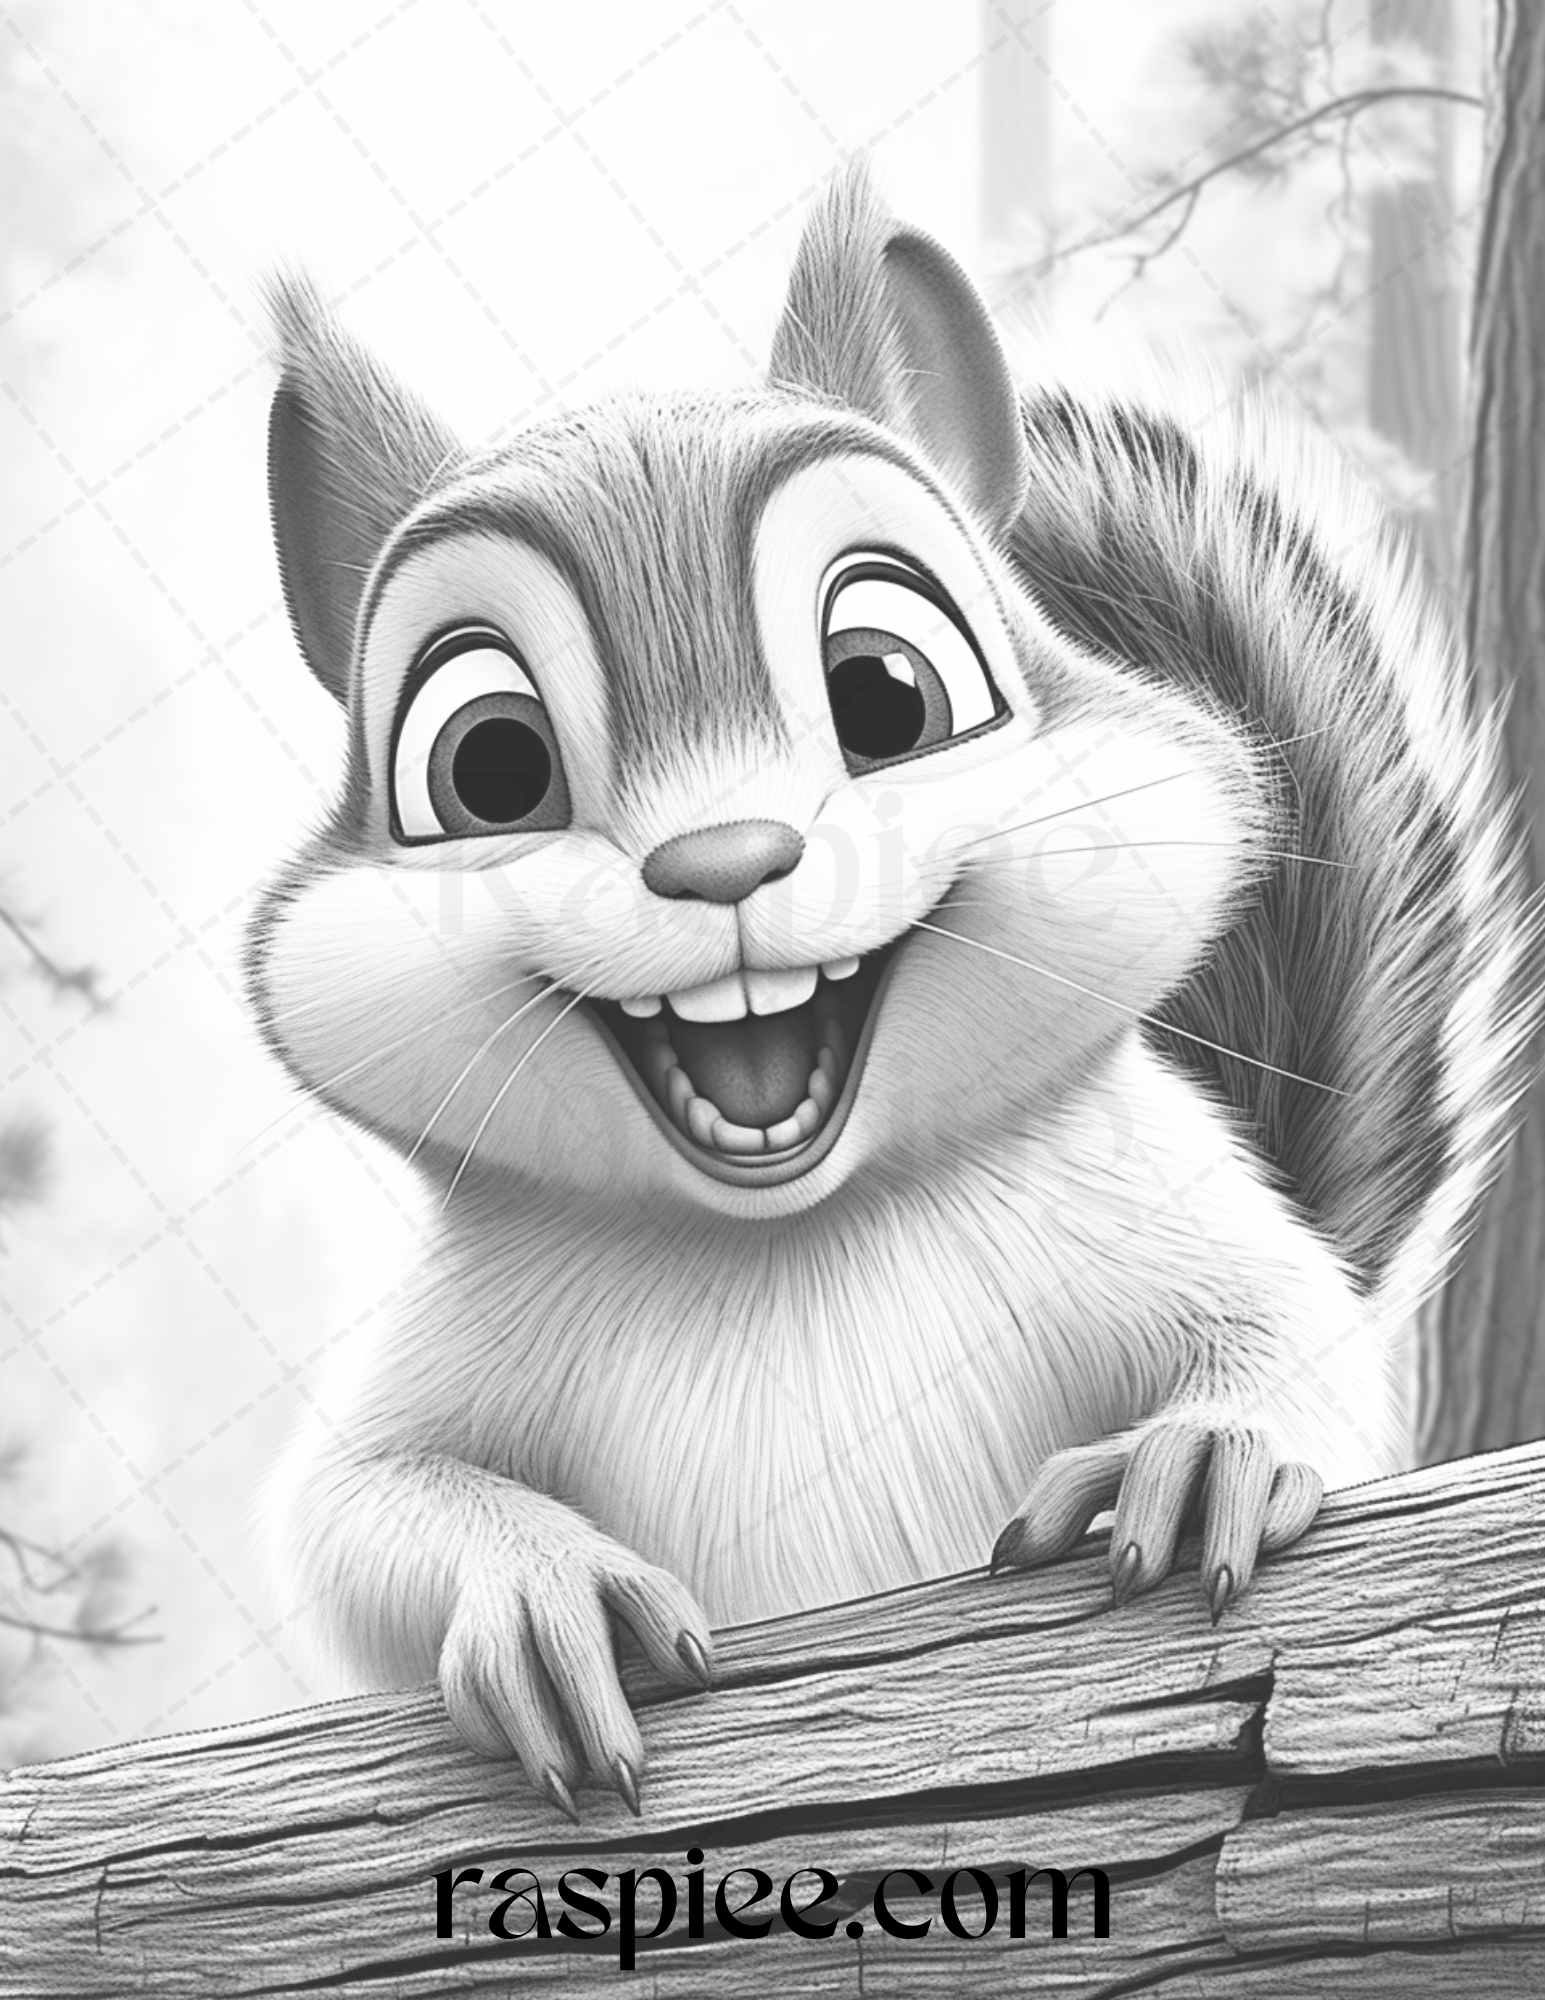 Adorable Squirrels Grayscale Coloring Page for Adults, Cute Squirrel Printable Coloring Art for Kids, High-quality Grayscale Coloring Sheet, Instant Download Adult and Kids Coloring Page, Relaxing Coloring Activity with Squirrels Illustration, Printable Coloring Craft featuring Cute Squirrels